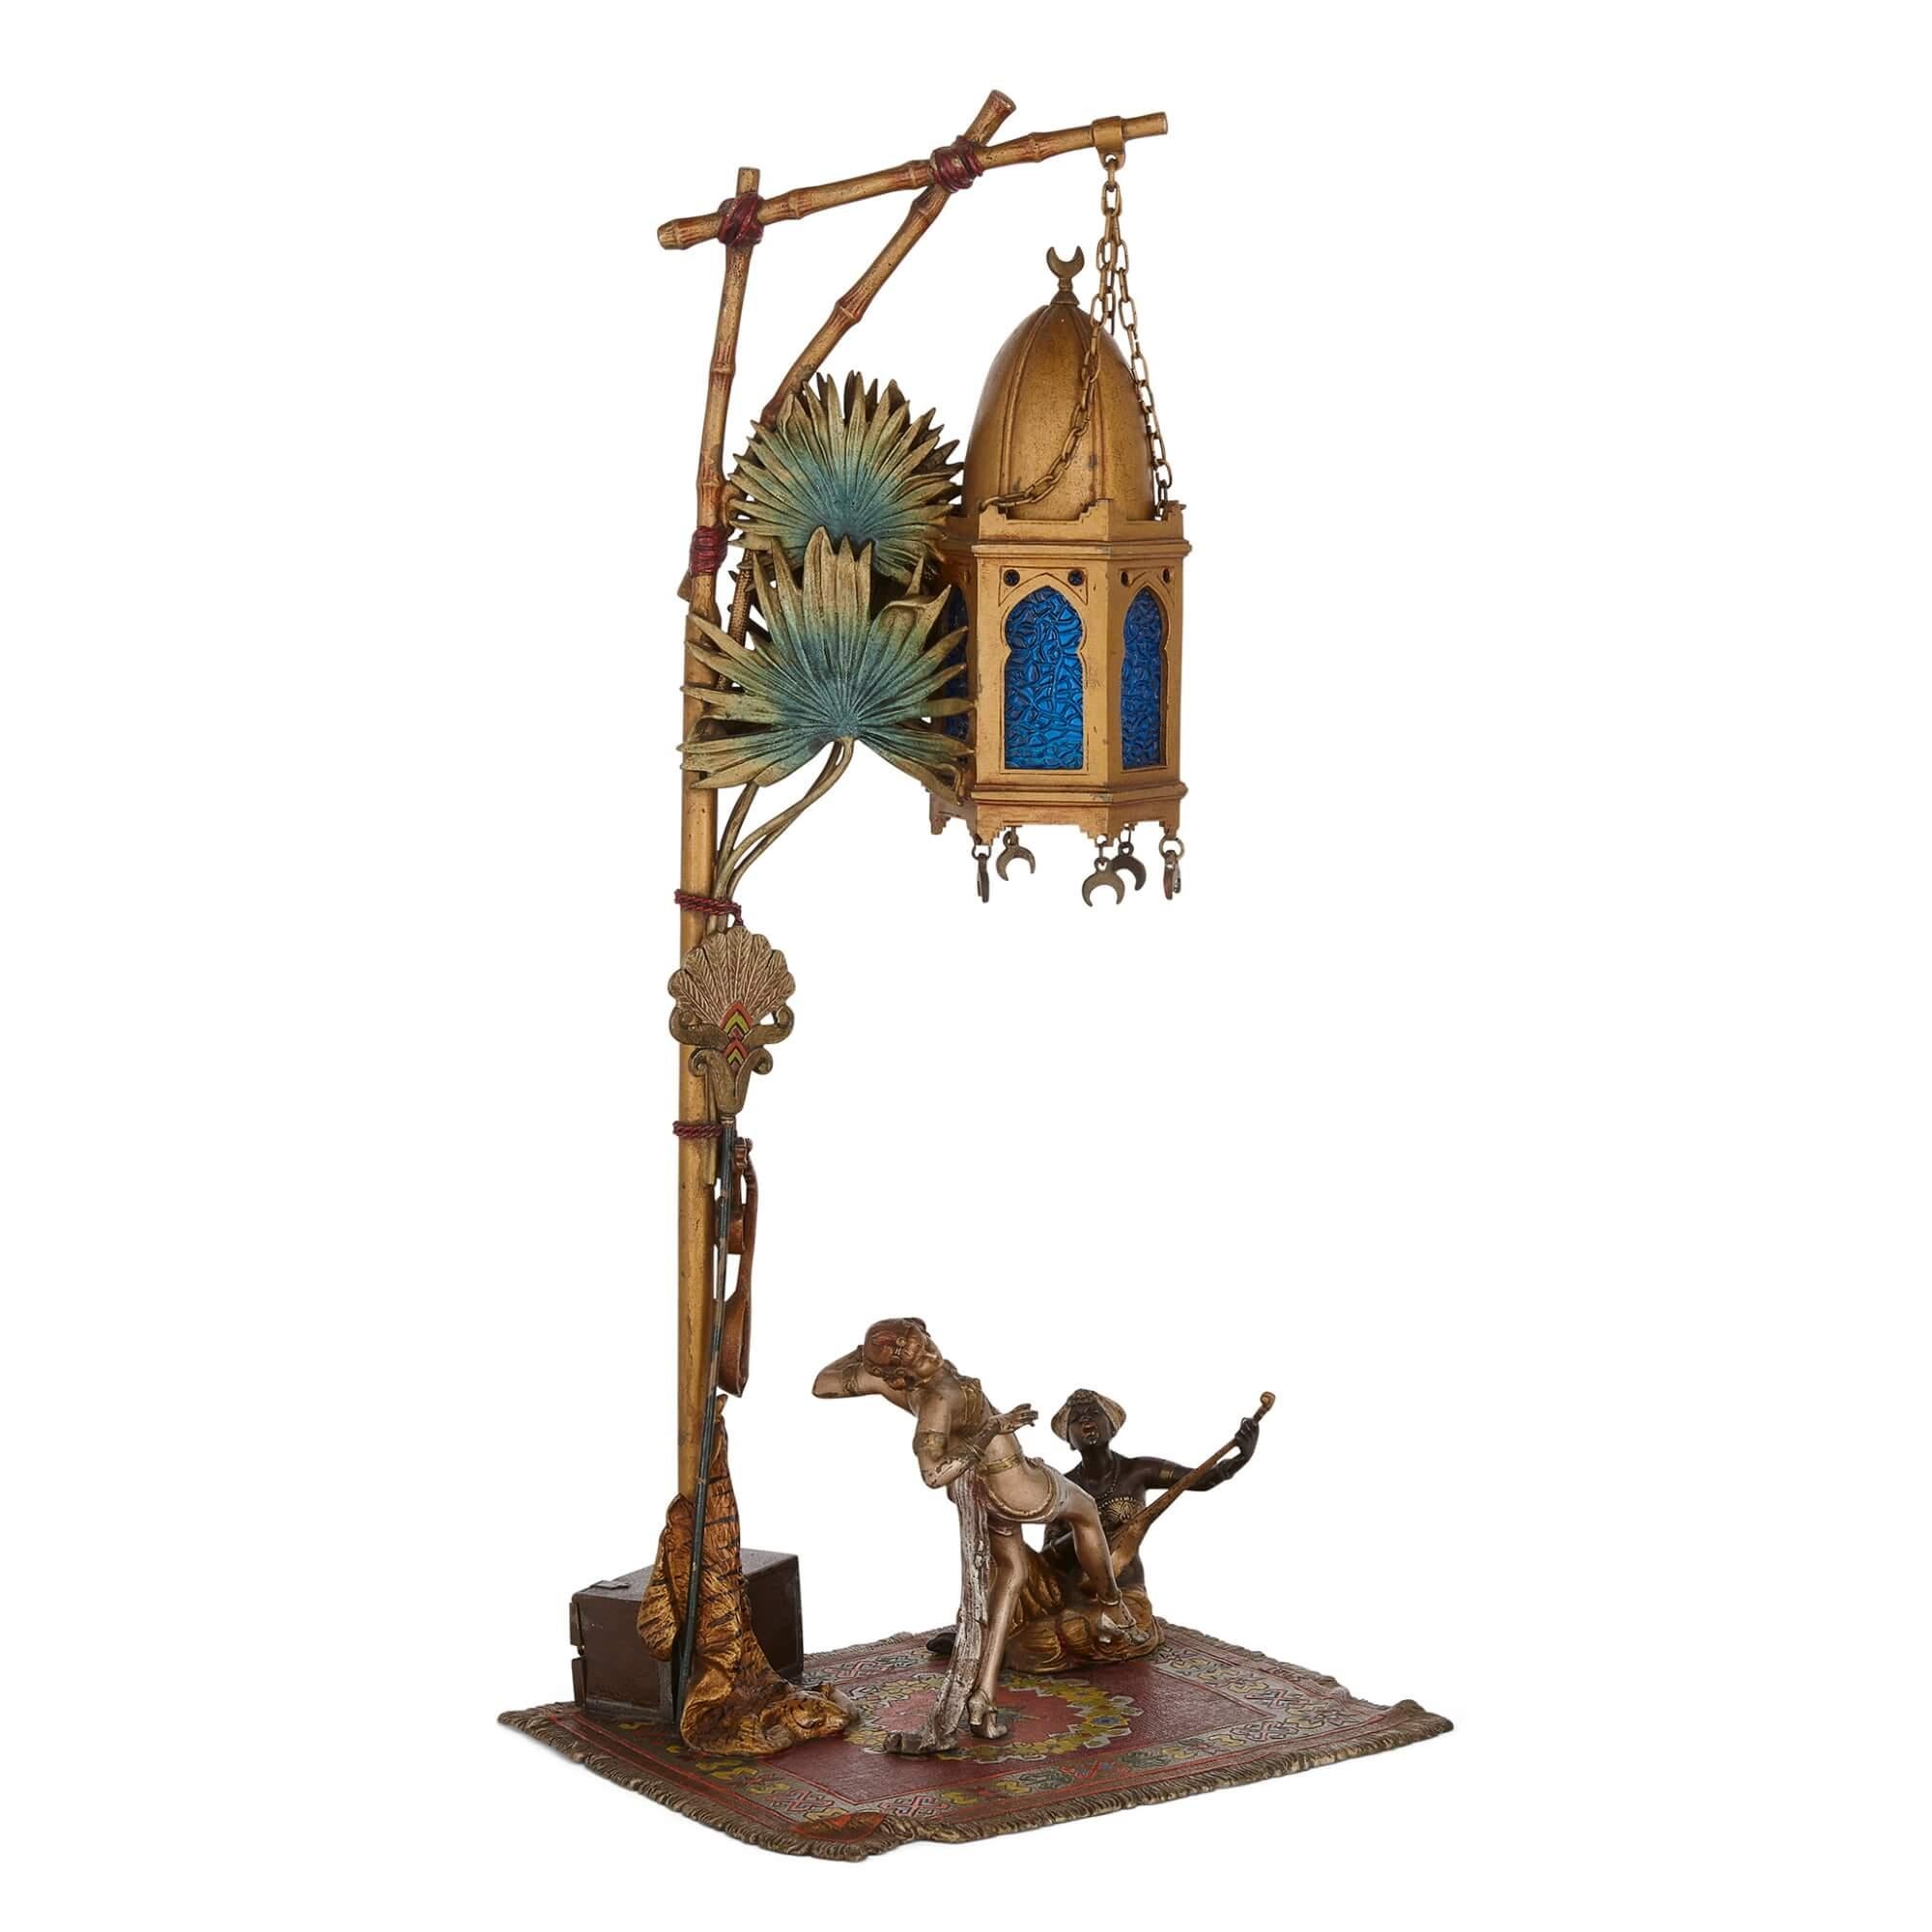 Viennese cold-painted bronze Orientalist figurative lamp of a dancer by Zach
Austrian, c. 1920
Height 44cm, width 21cm, depth 18cm

This superb cold-painted bronze sculptural lamp was crafted by Bruno Zach (1891-1935), a famous Ukrainian-born